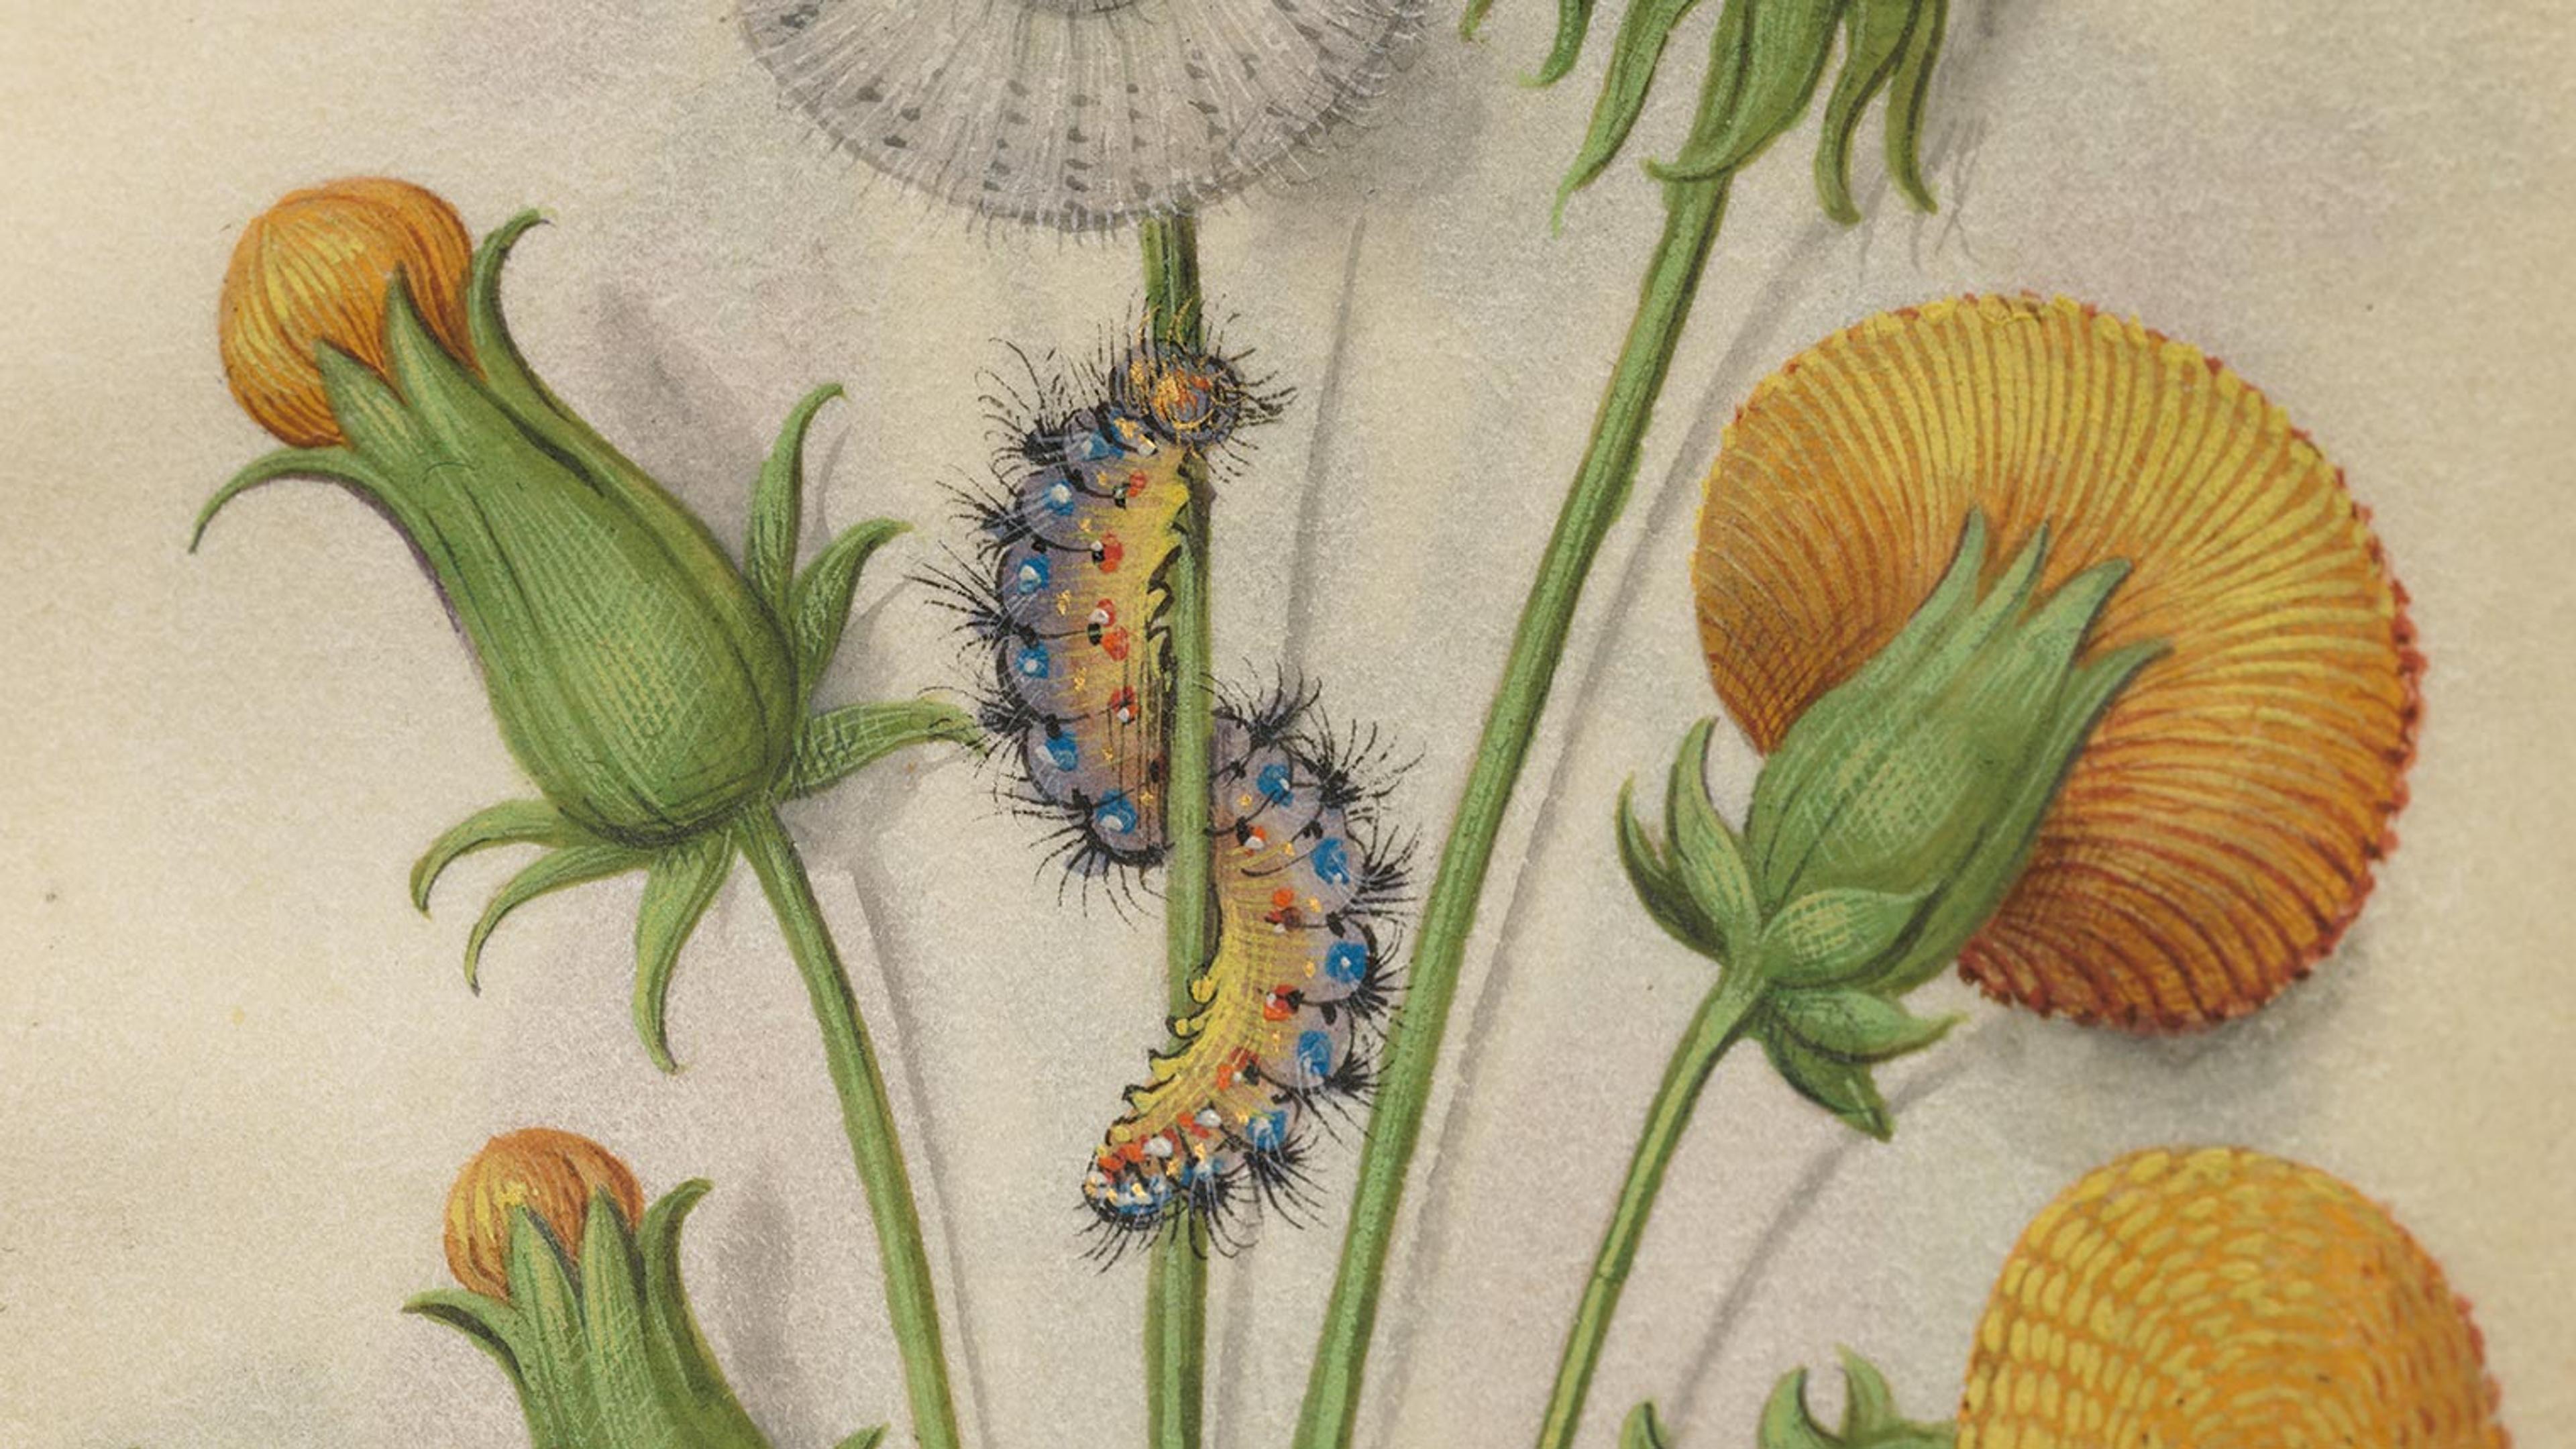 An open book with an ornate painting of a catepillar crawling on a flower